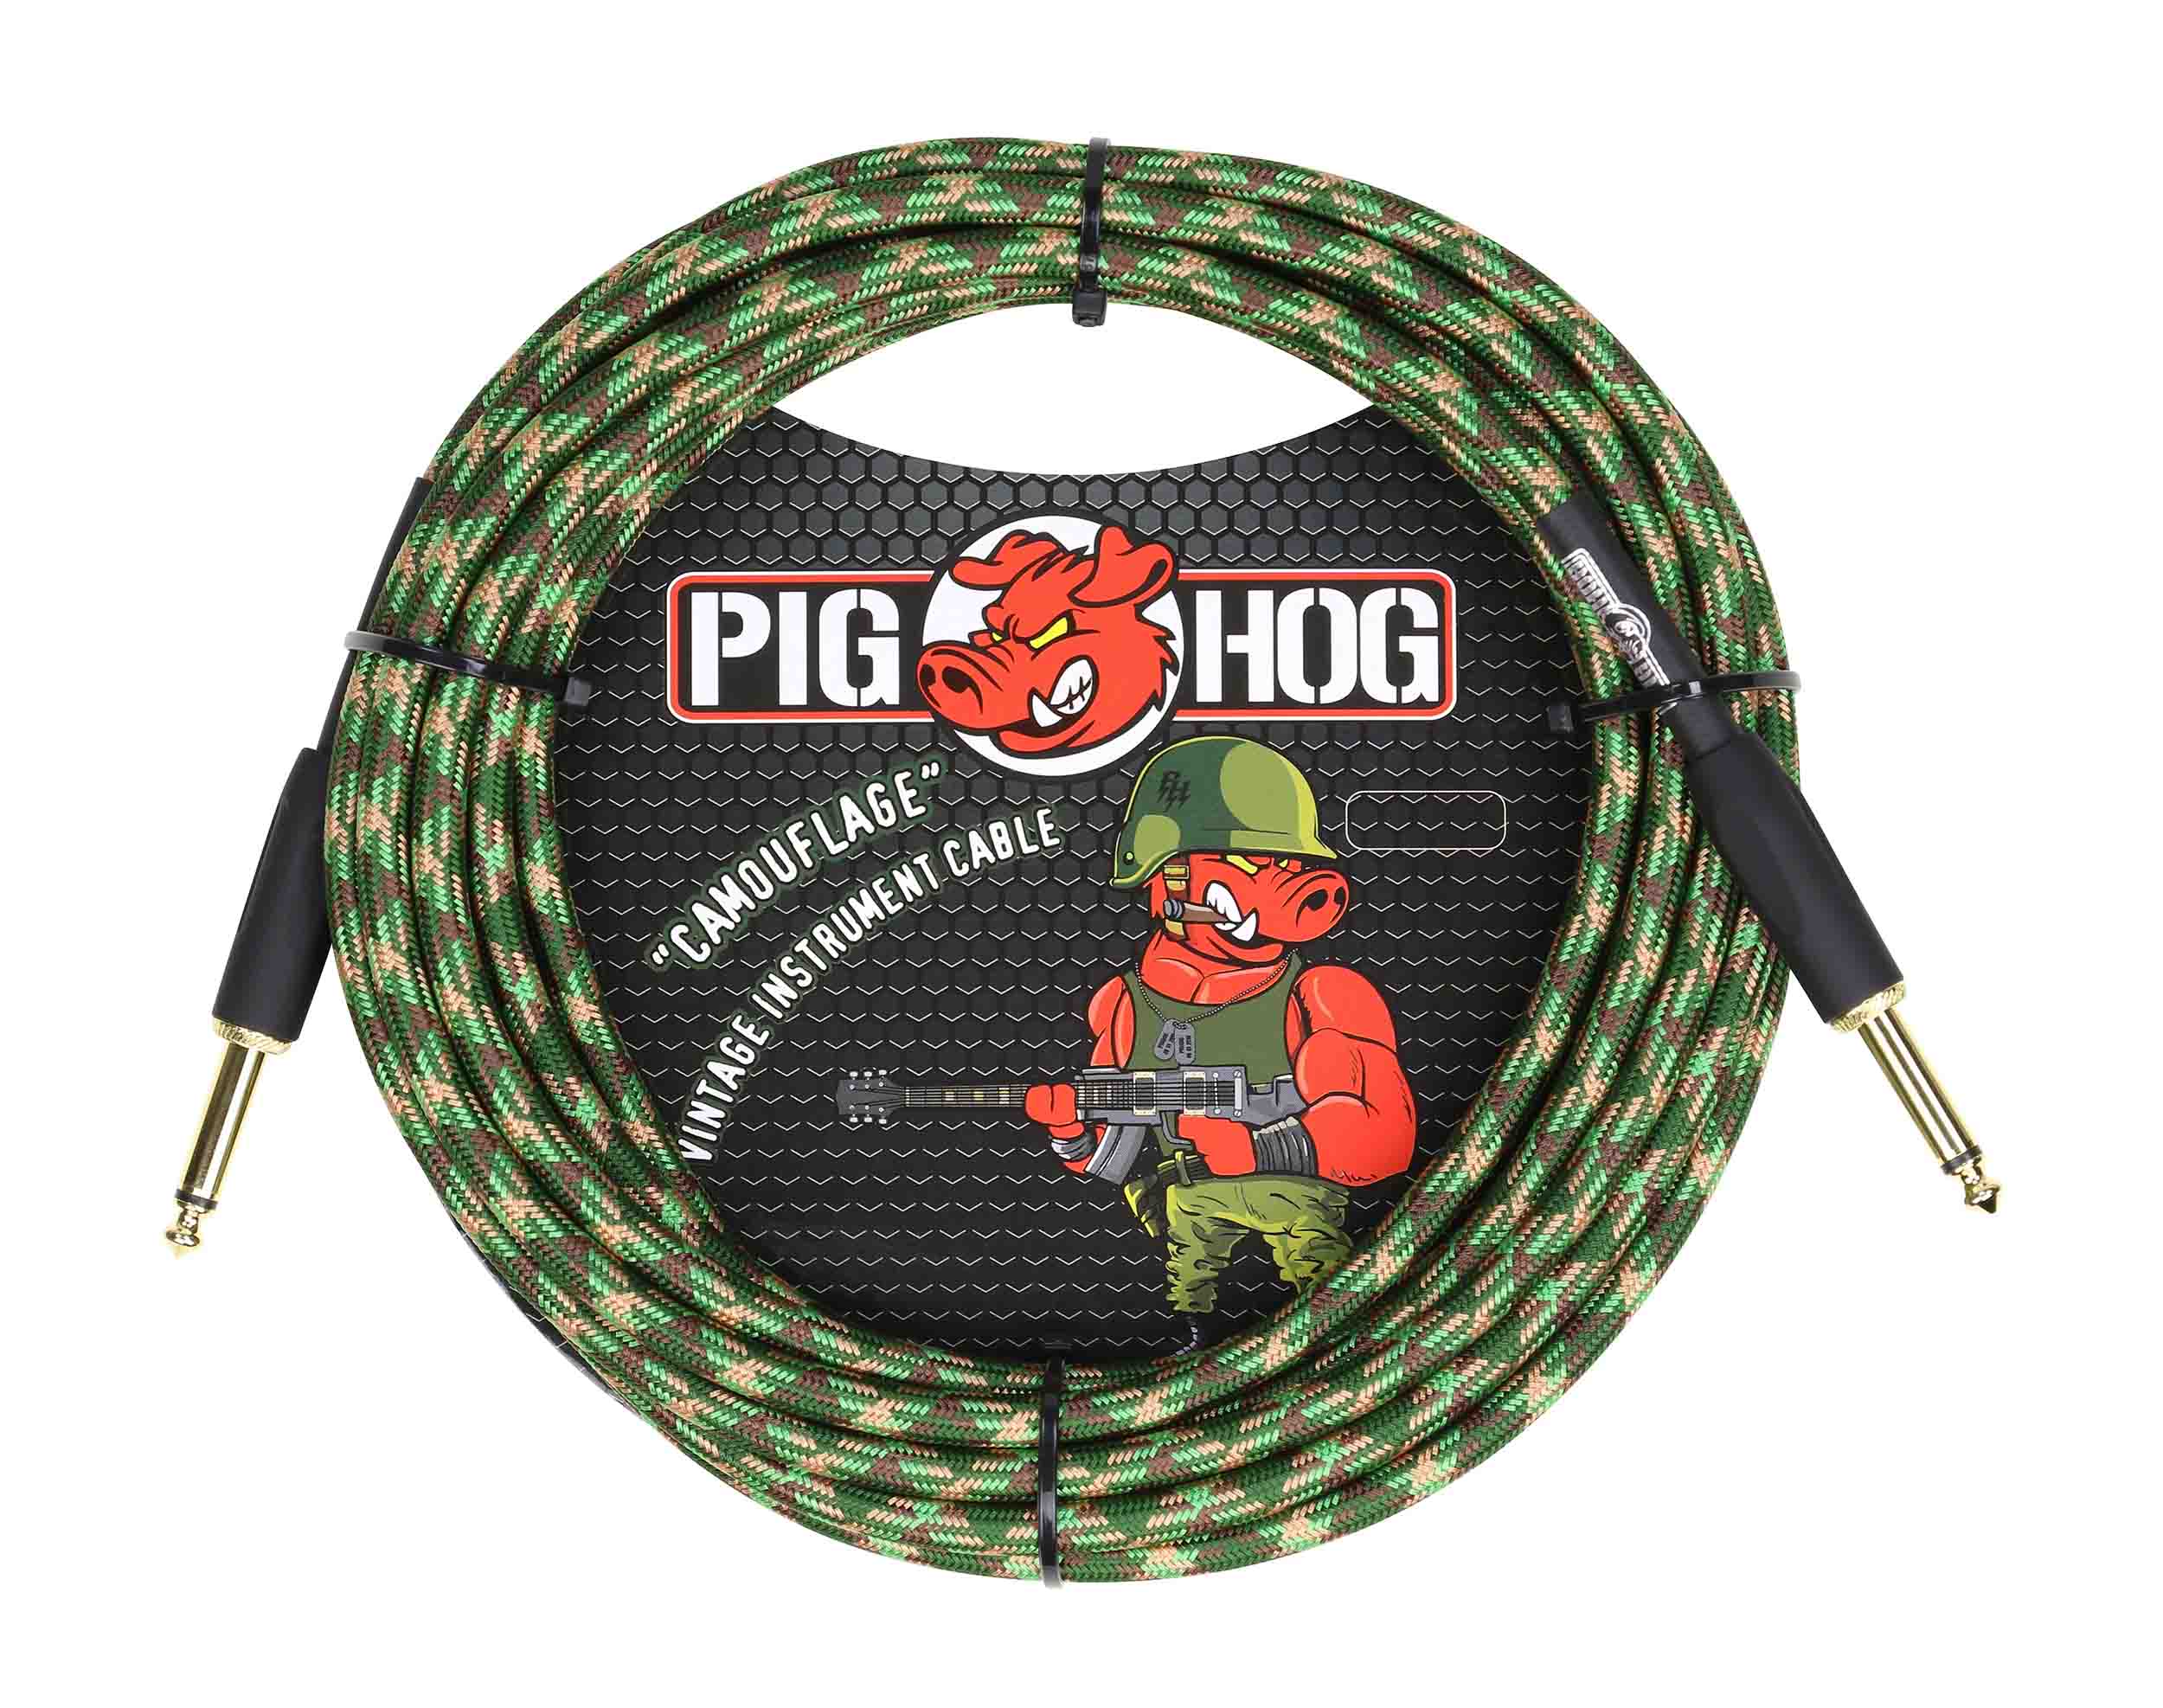 Pig Hog PCH20CPR "Camouflage" Instrument Cable - 20 ft - Hollywood DJ